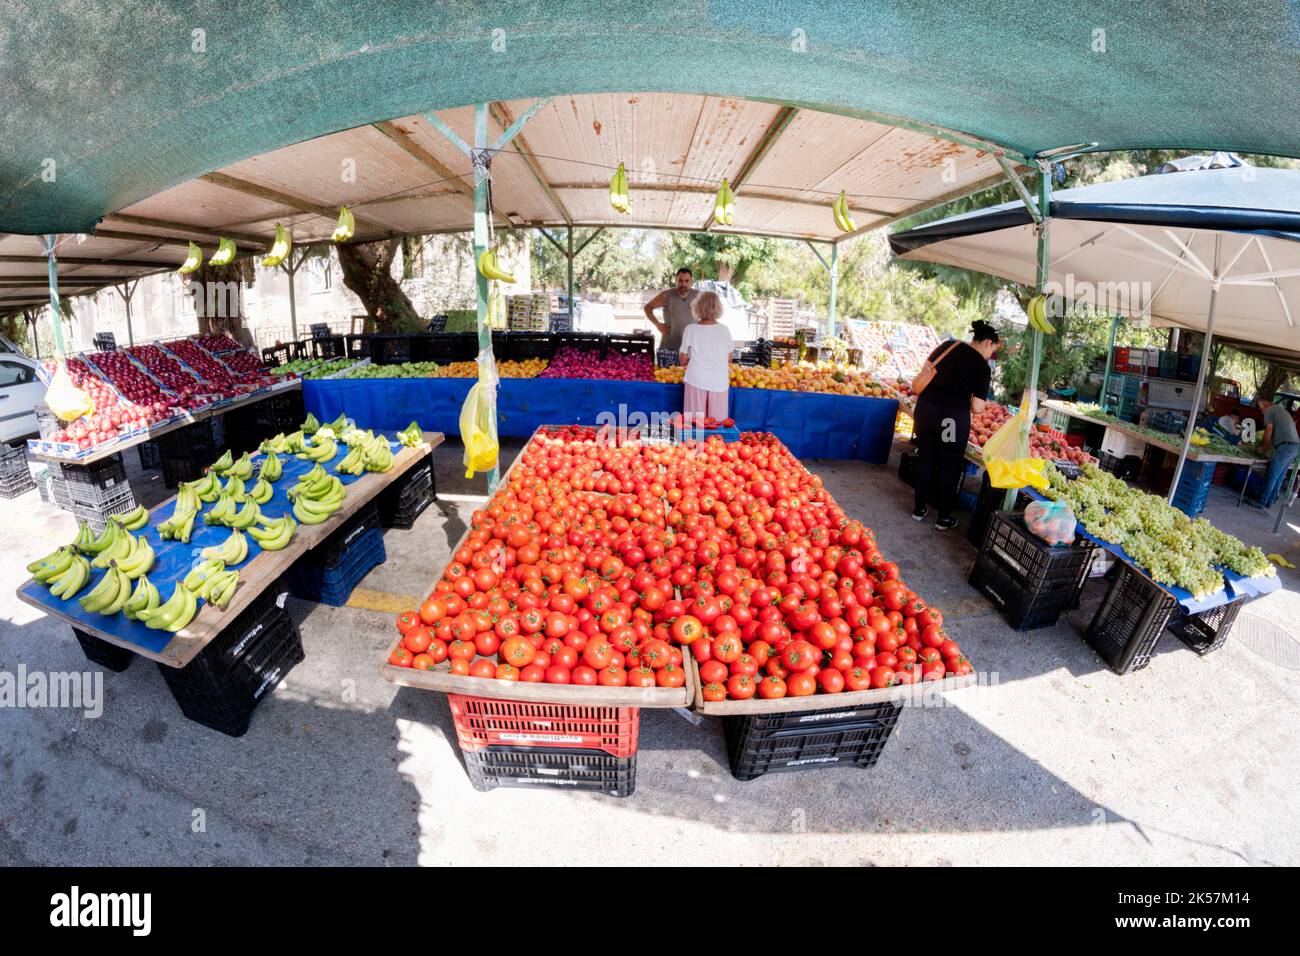 Fresh fruit and vegetables, including a large display of tomatoes for sale on a market stall in an open air market. Customers are selecting produce. Stock Photo